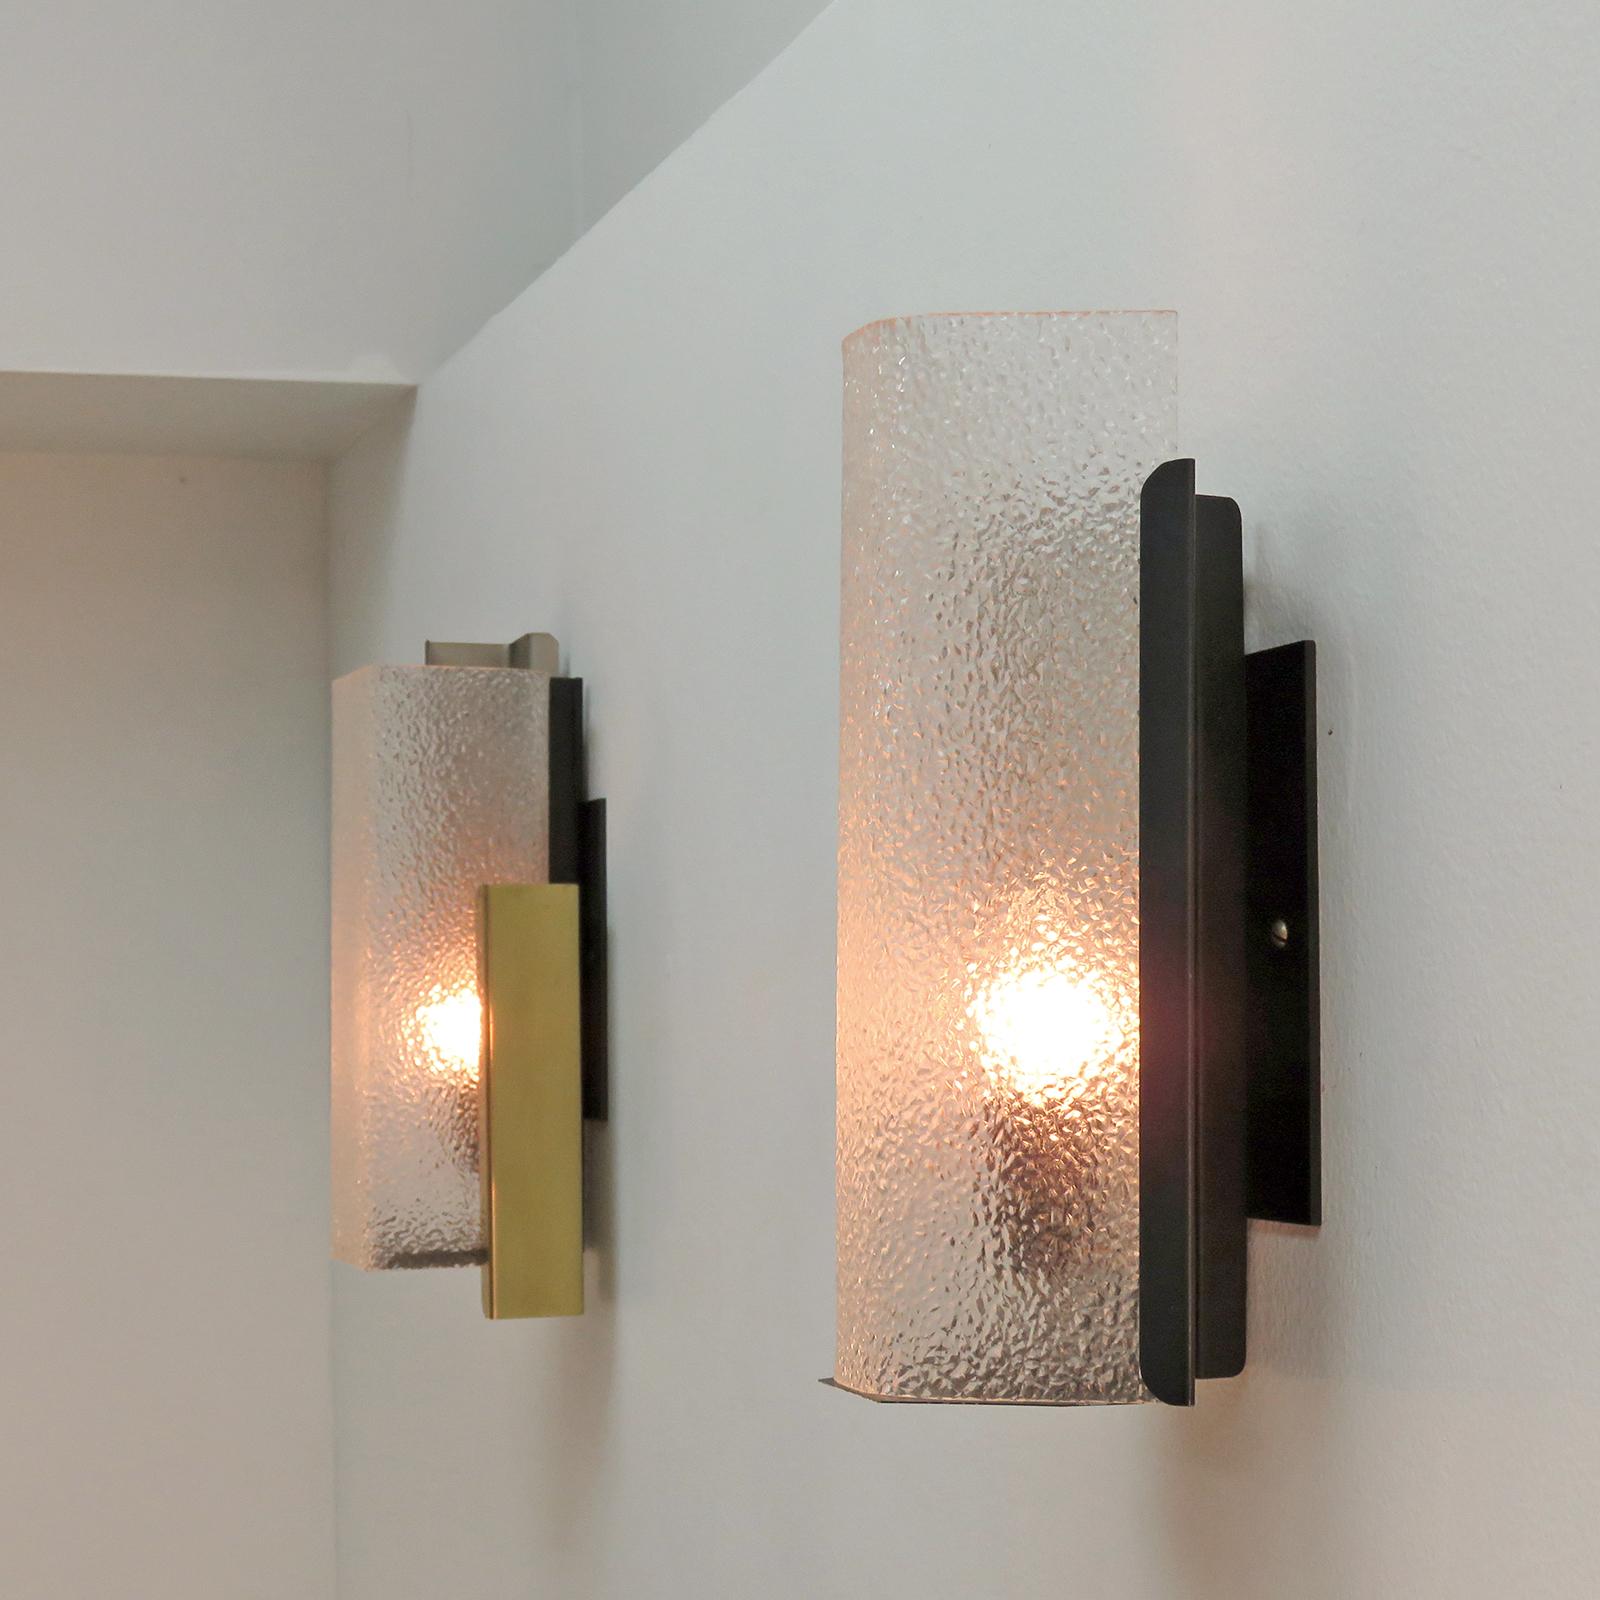 Mid-20th Century Geometric Wall Sconce by Arlus For Sale